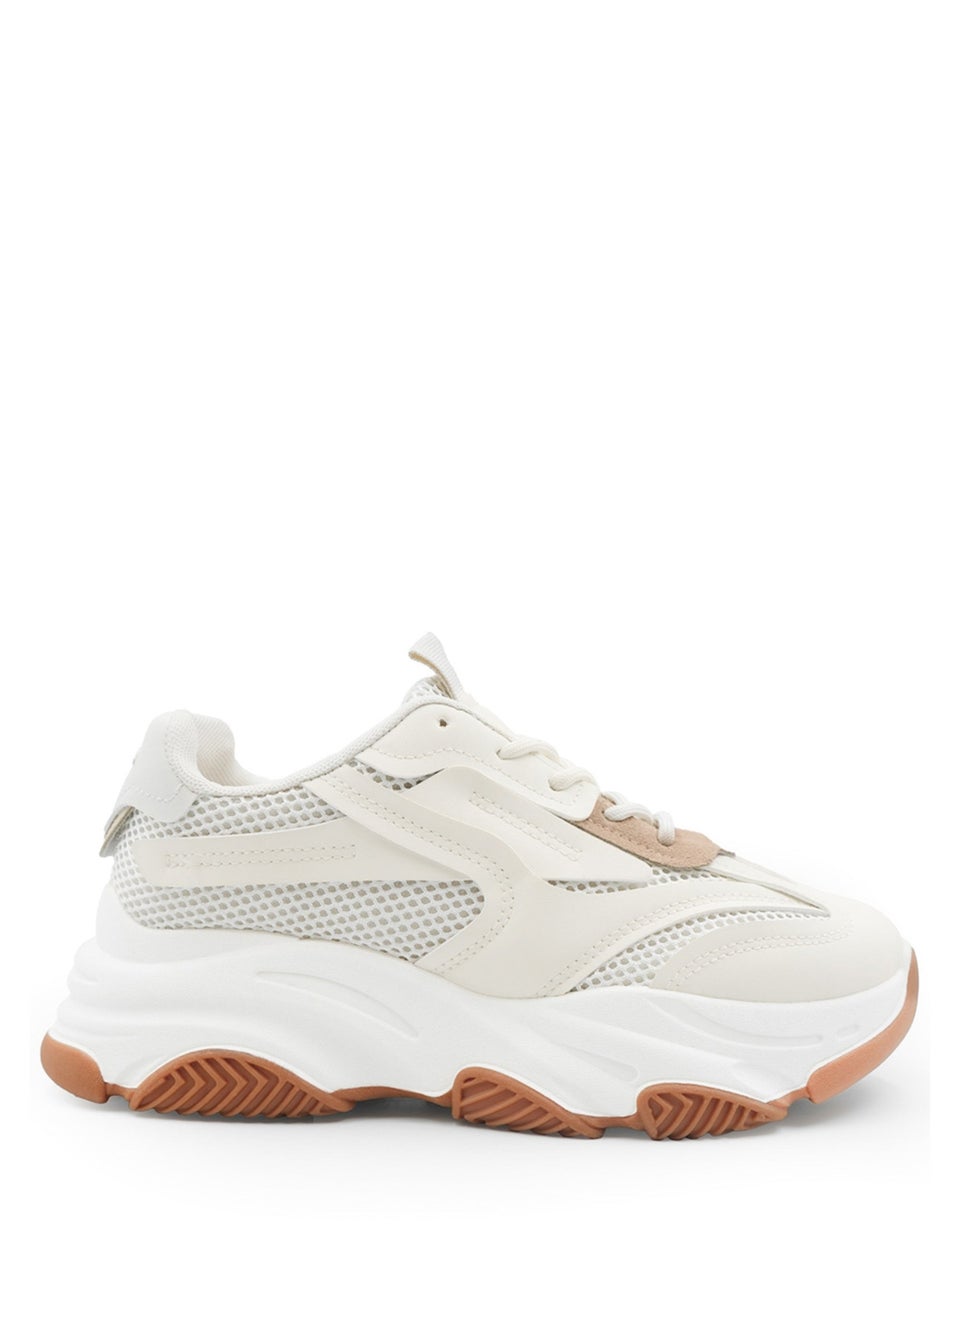 Where's That From Downtown Cream Pu Chunky Sole Trainers